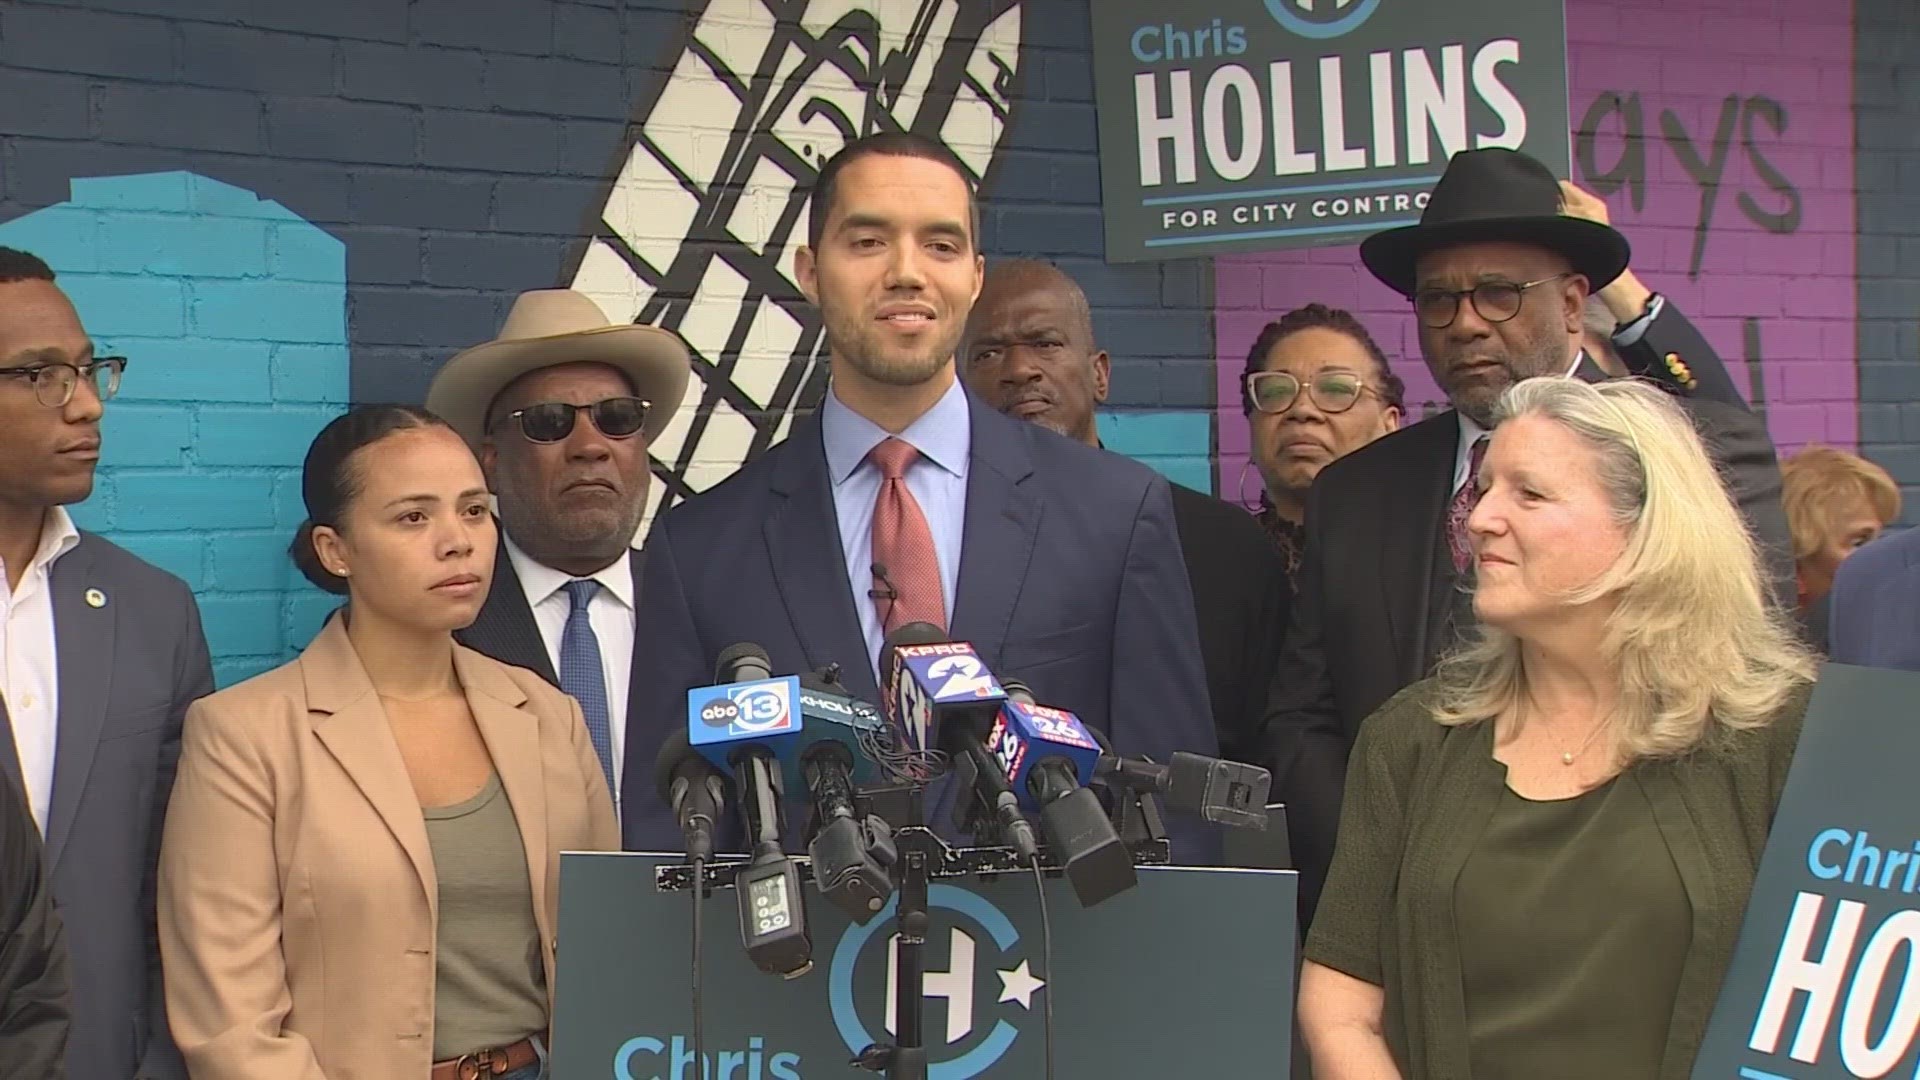 “The challenges that we face as a city are real: guns on our streets at an all-time high; affordability in our neighborhoods at an all-time low," Hollins said.